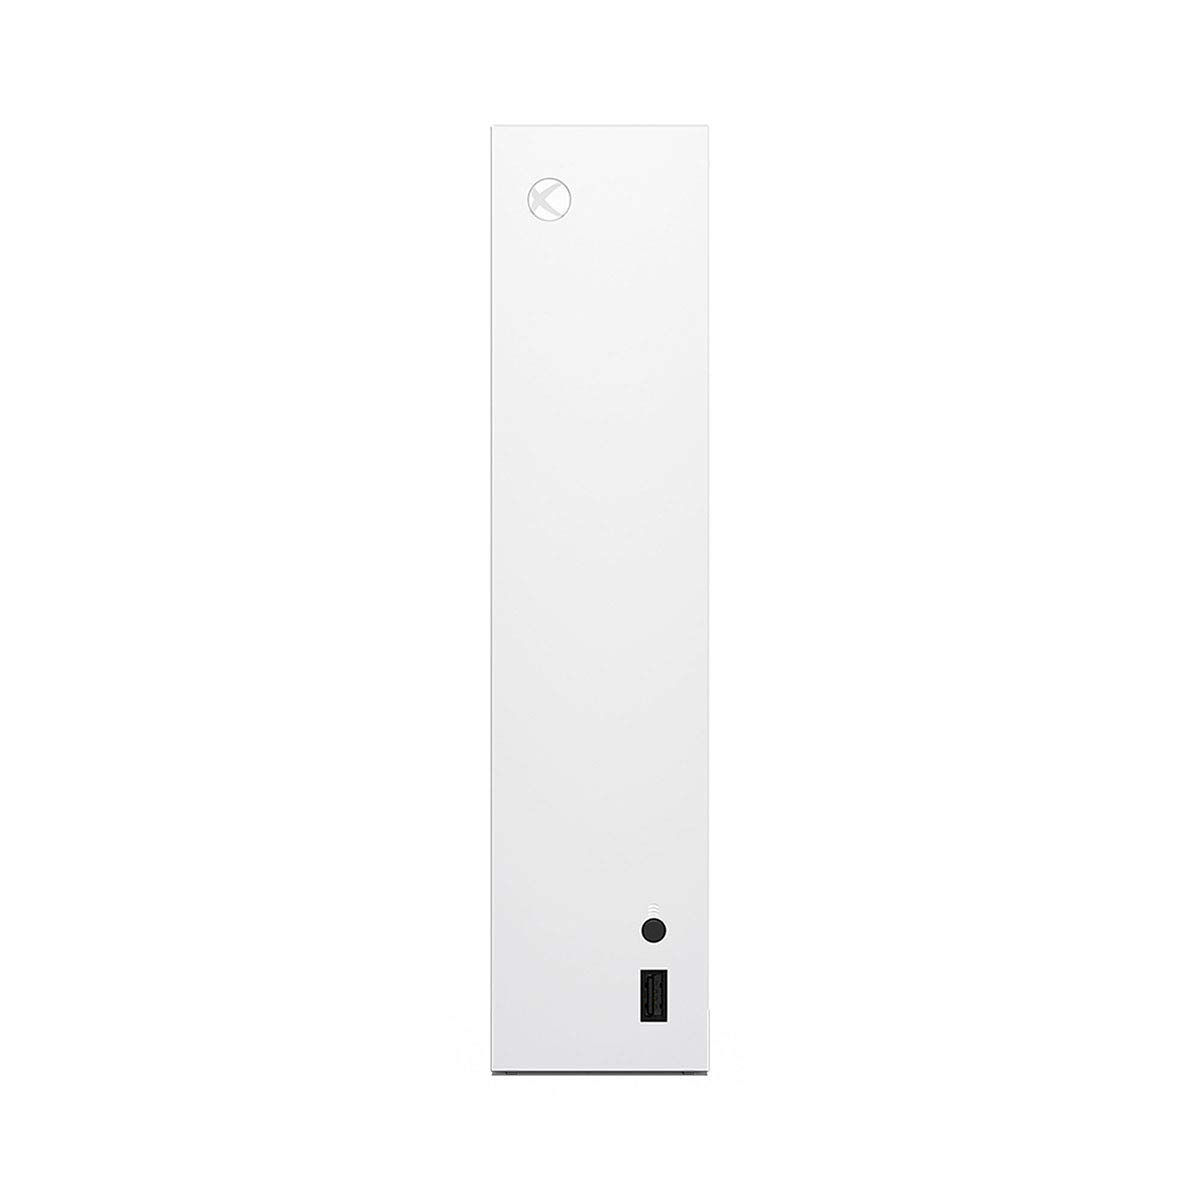 2020 New Xbox 512GB SSD Console -Robot White - image 4 of 7